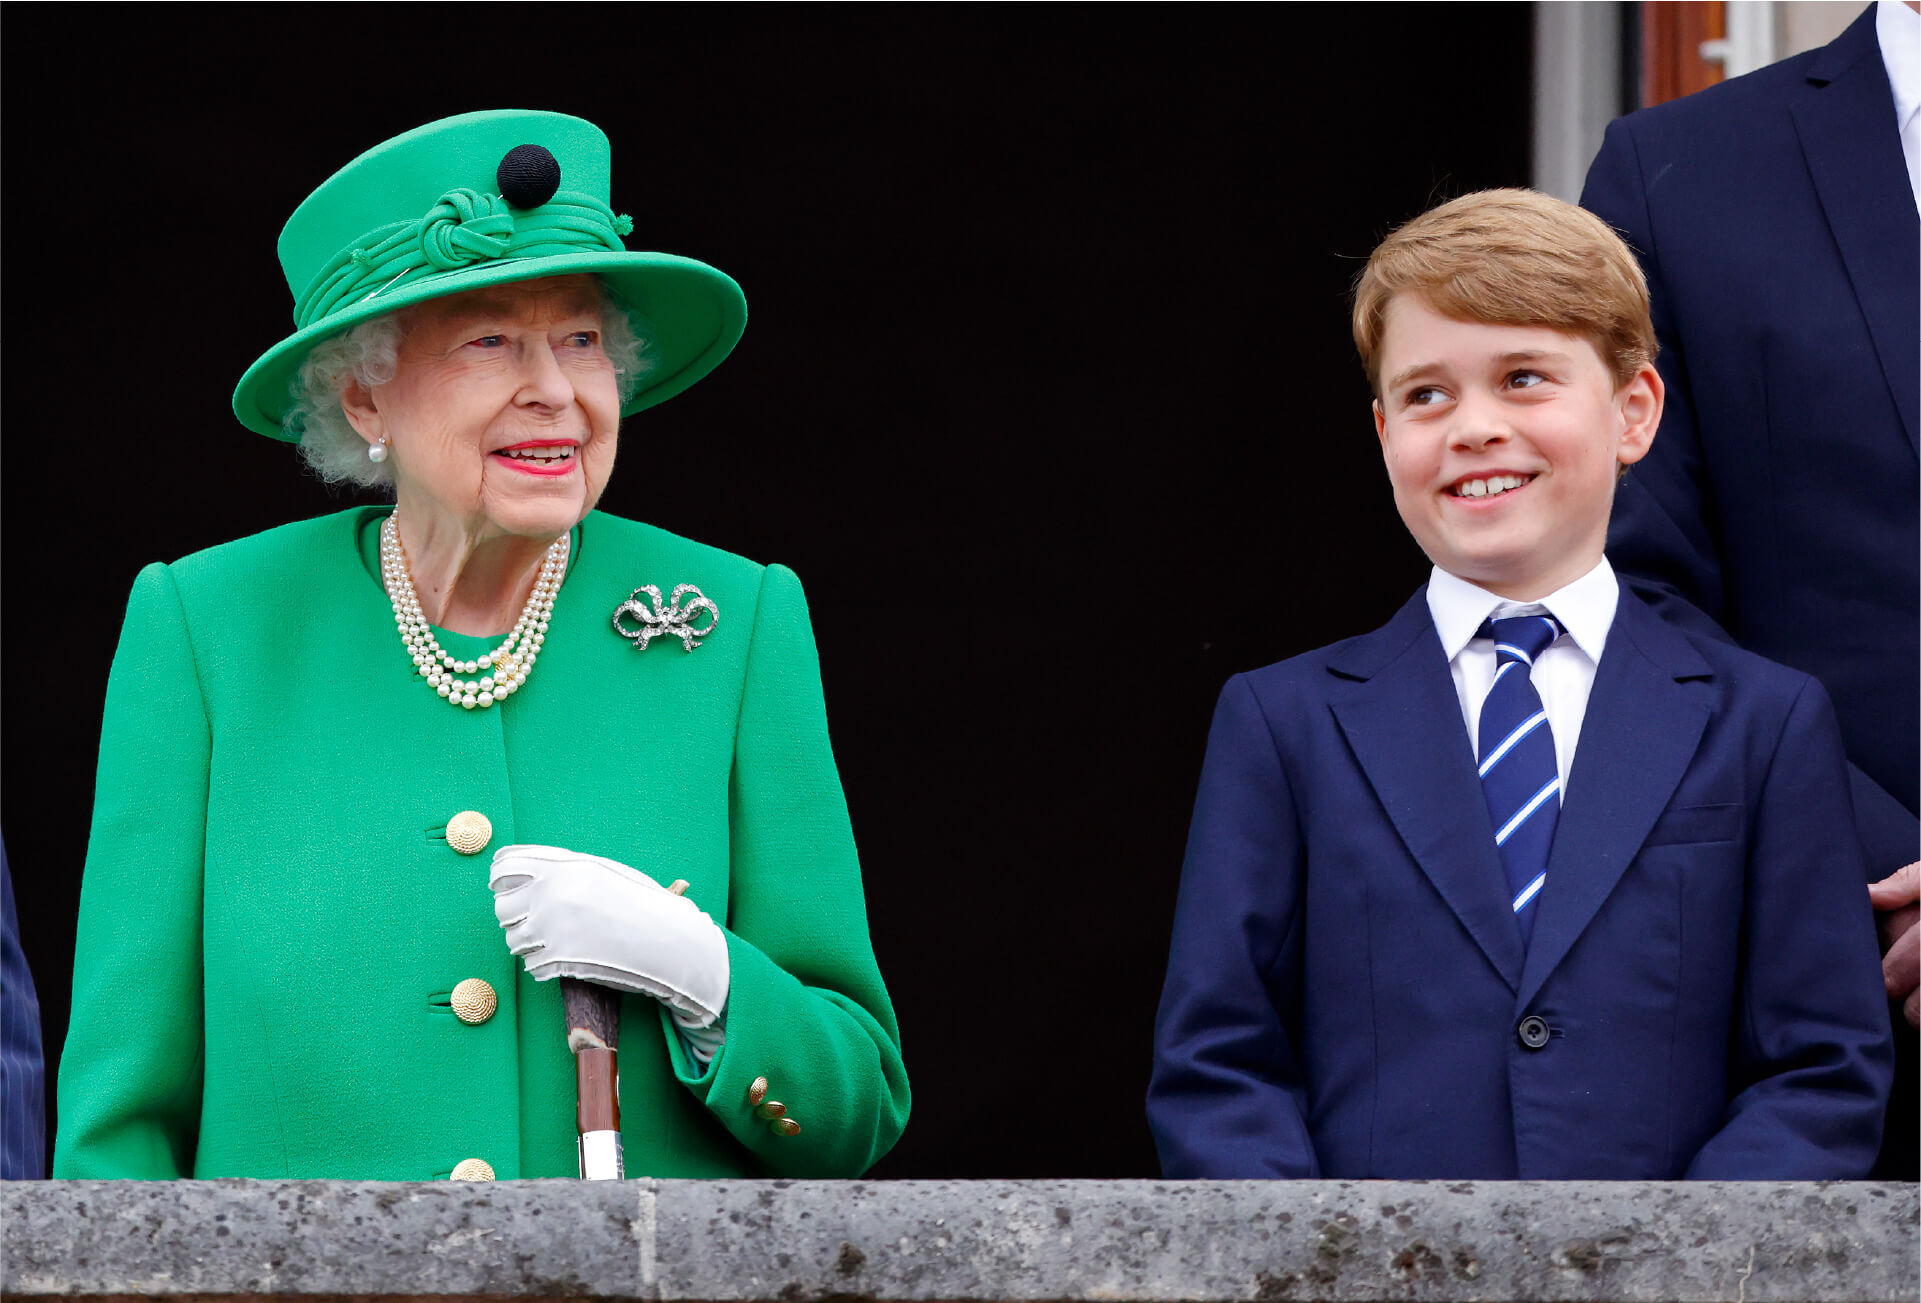 Queen Elizabeth standing on a balcony next to a smiling young Prince George.  The Queen wears an emerald green suit jacket with a matching wide-brimmed hat, a three-row pearl necklace and a diamond brooch.  She leans on a cane which she grasps with a white-gloved hand.